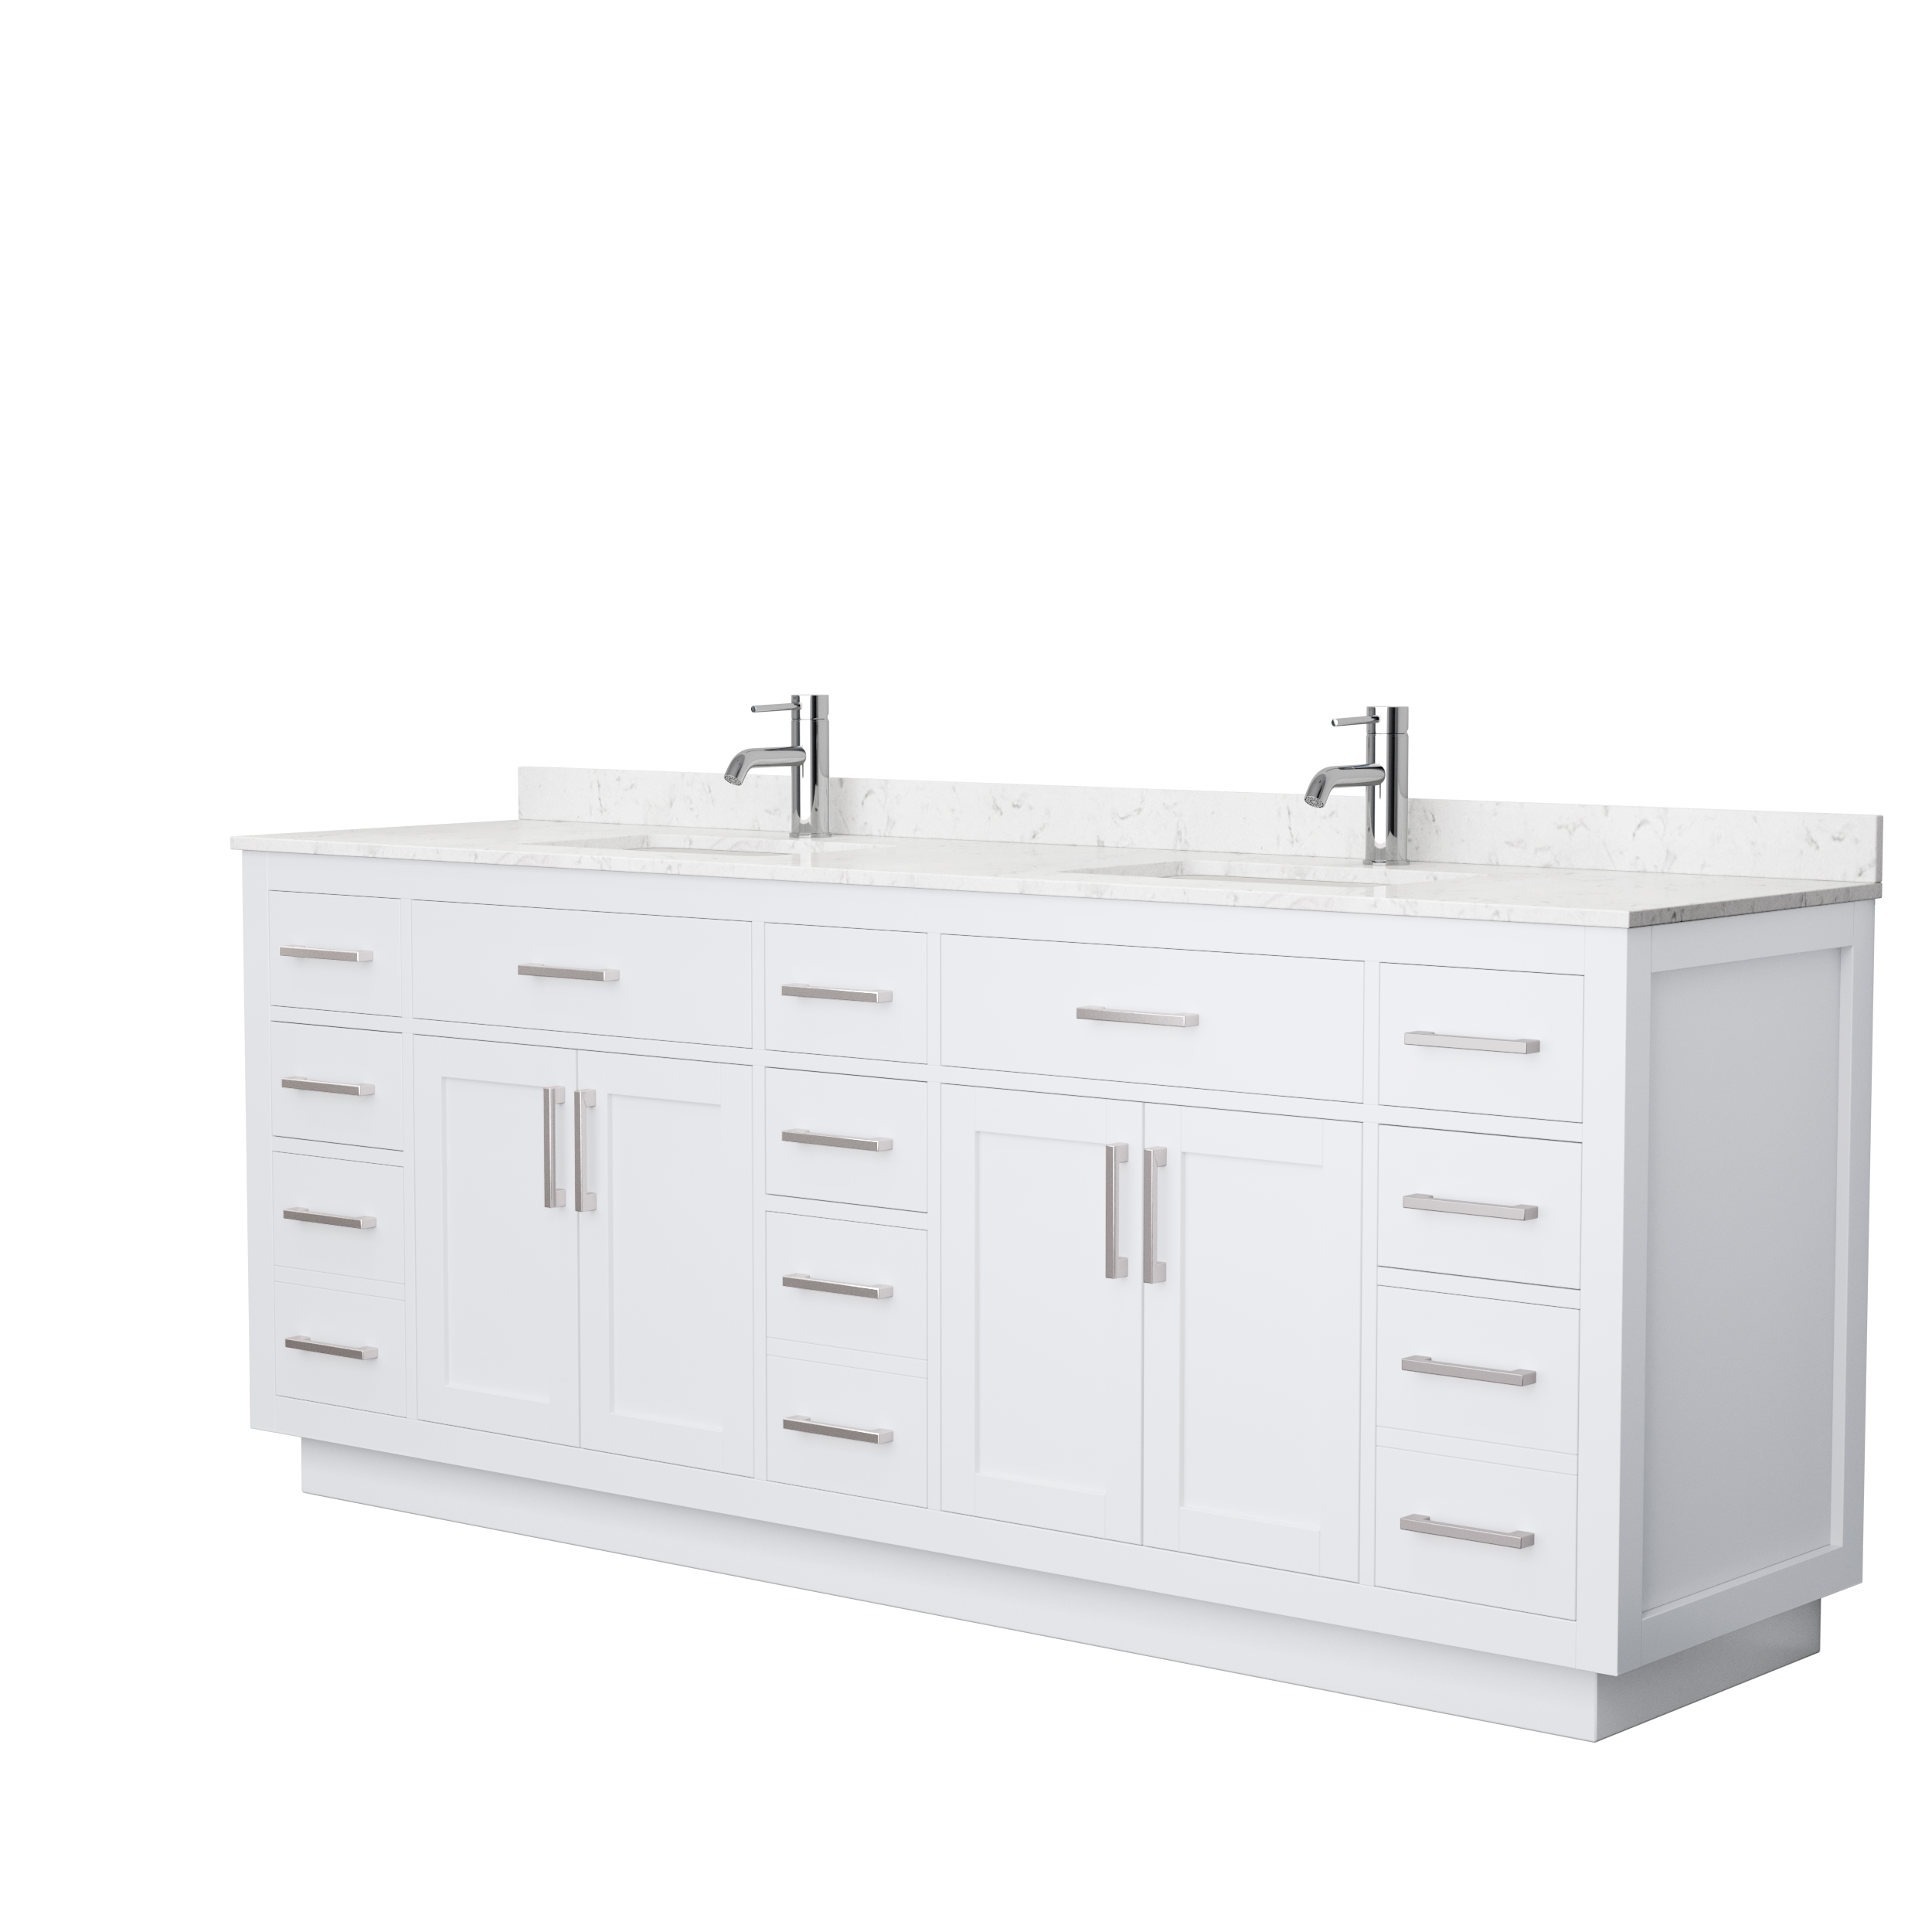 beckett 84" double bathroom vanity with toe kick, cultured marble counter - white